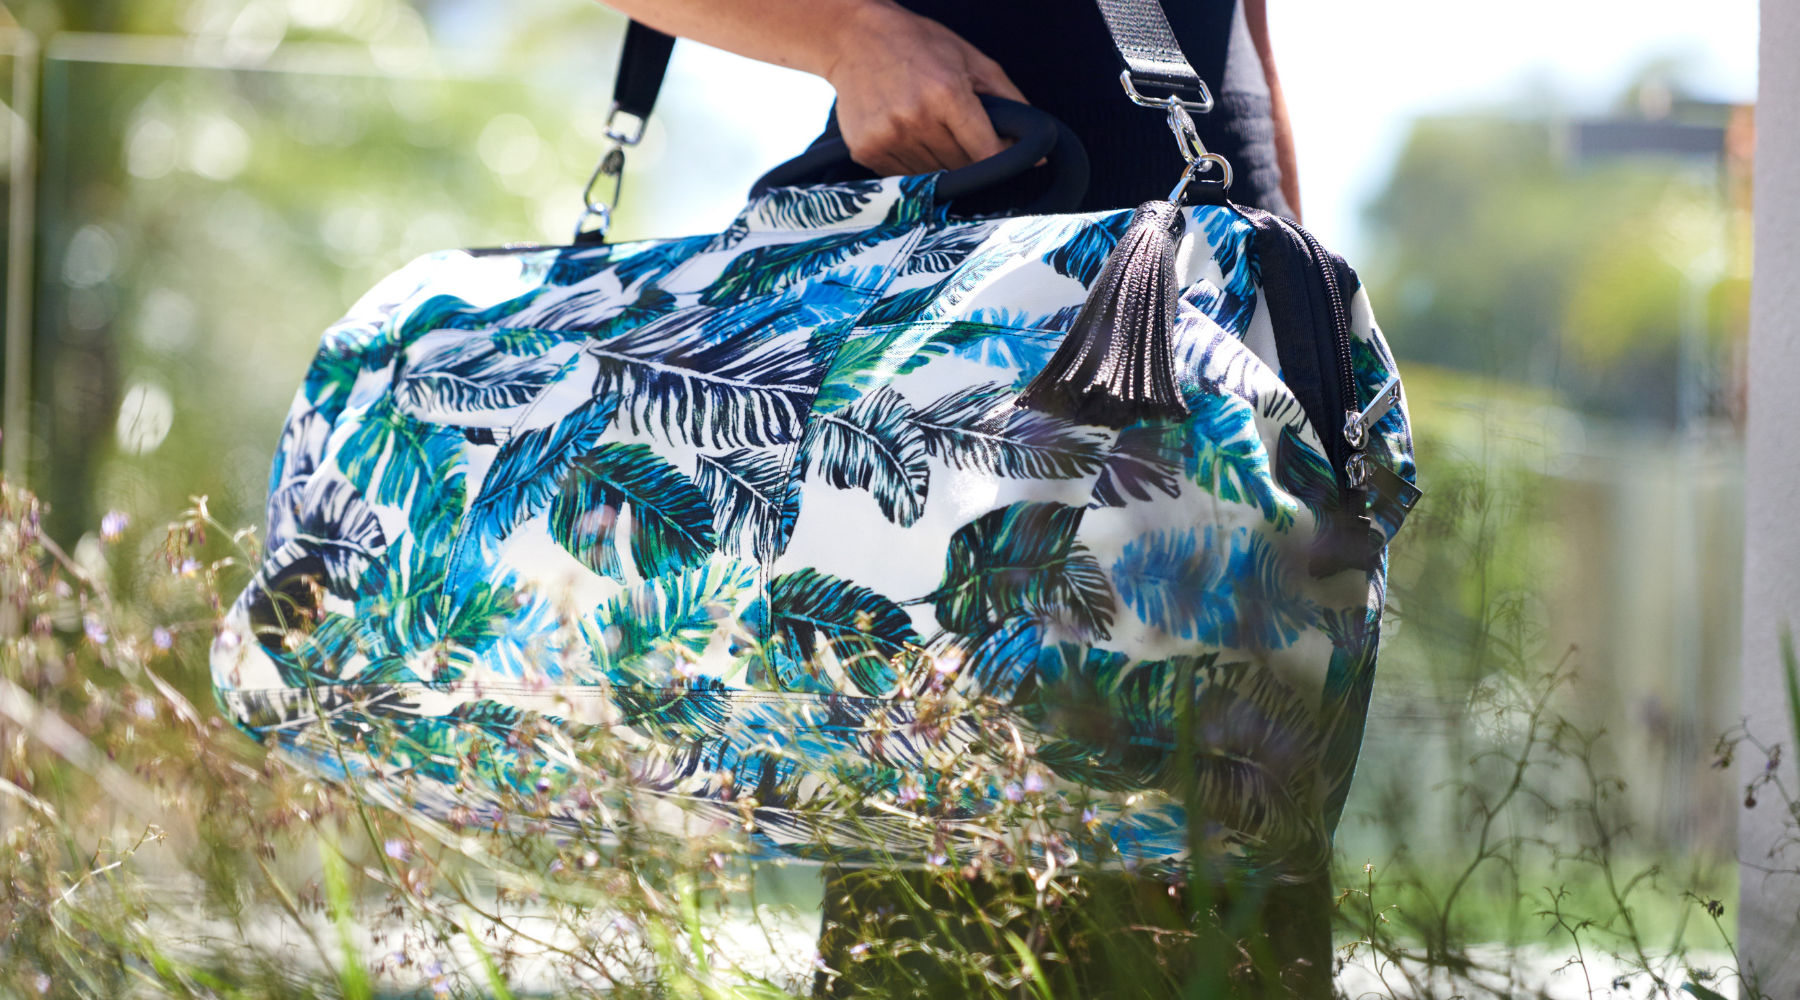 The ultimate bag for beach and picnics